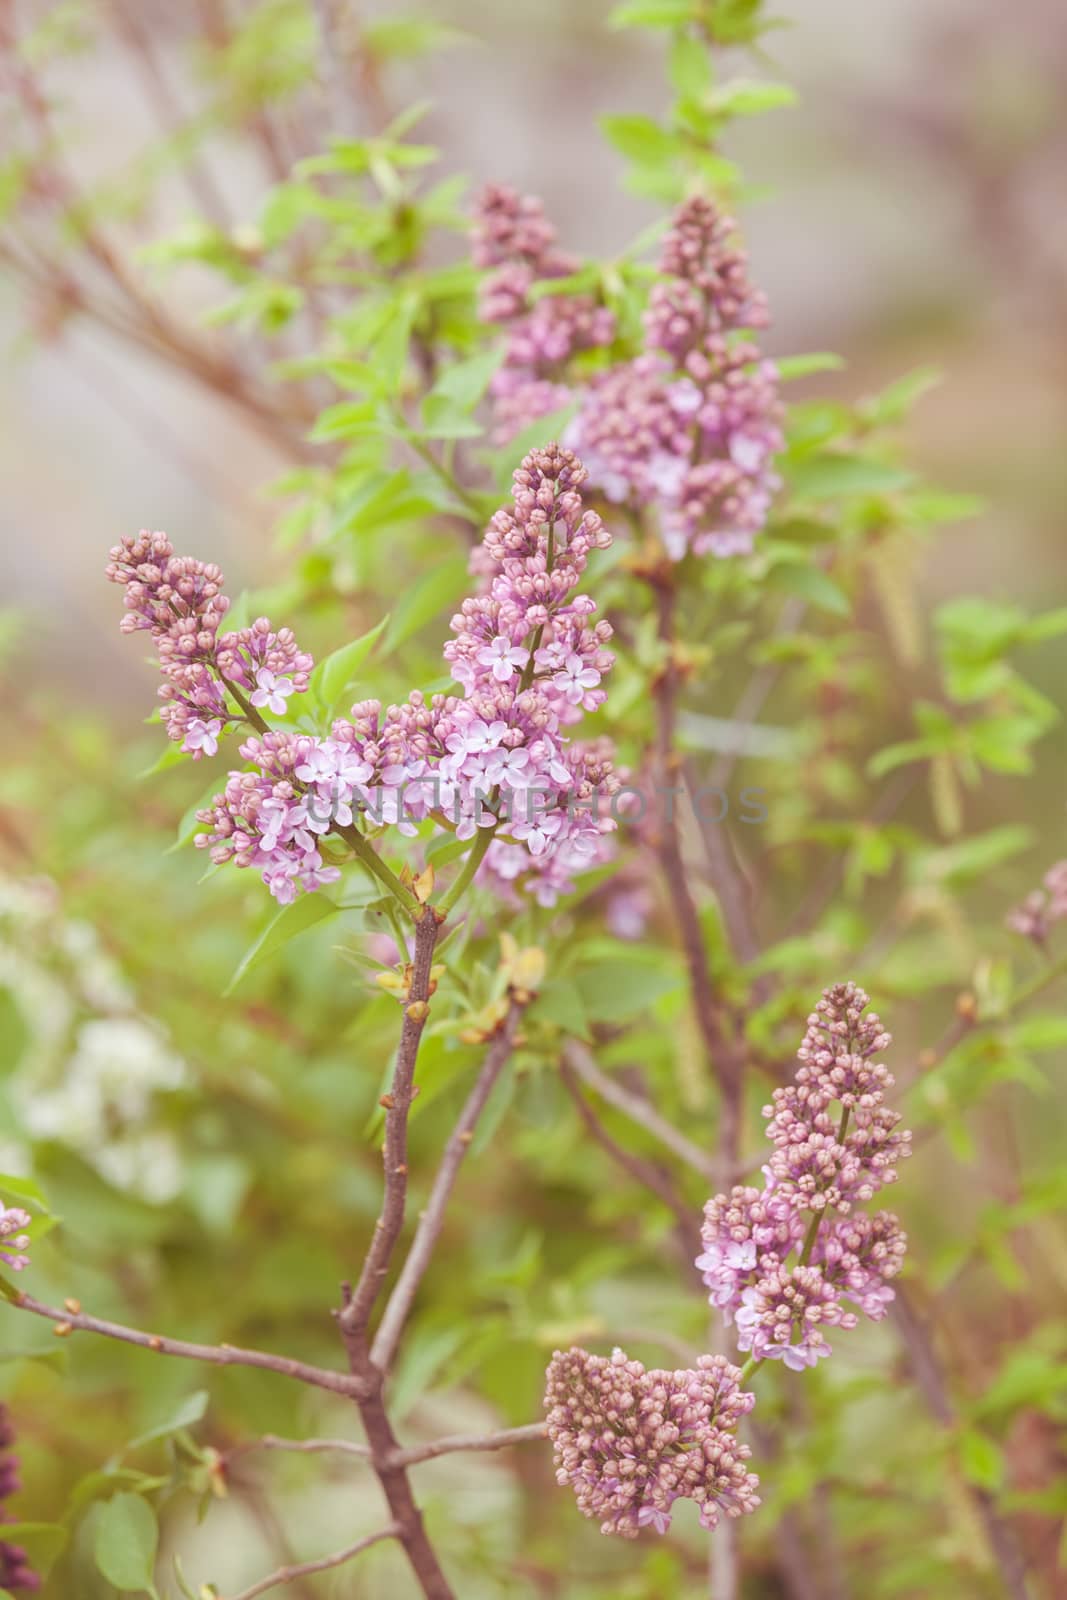 branchs of lilac in bloom, note shallow depth of field